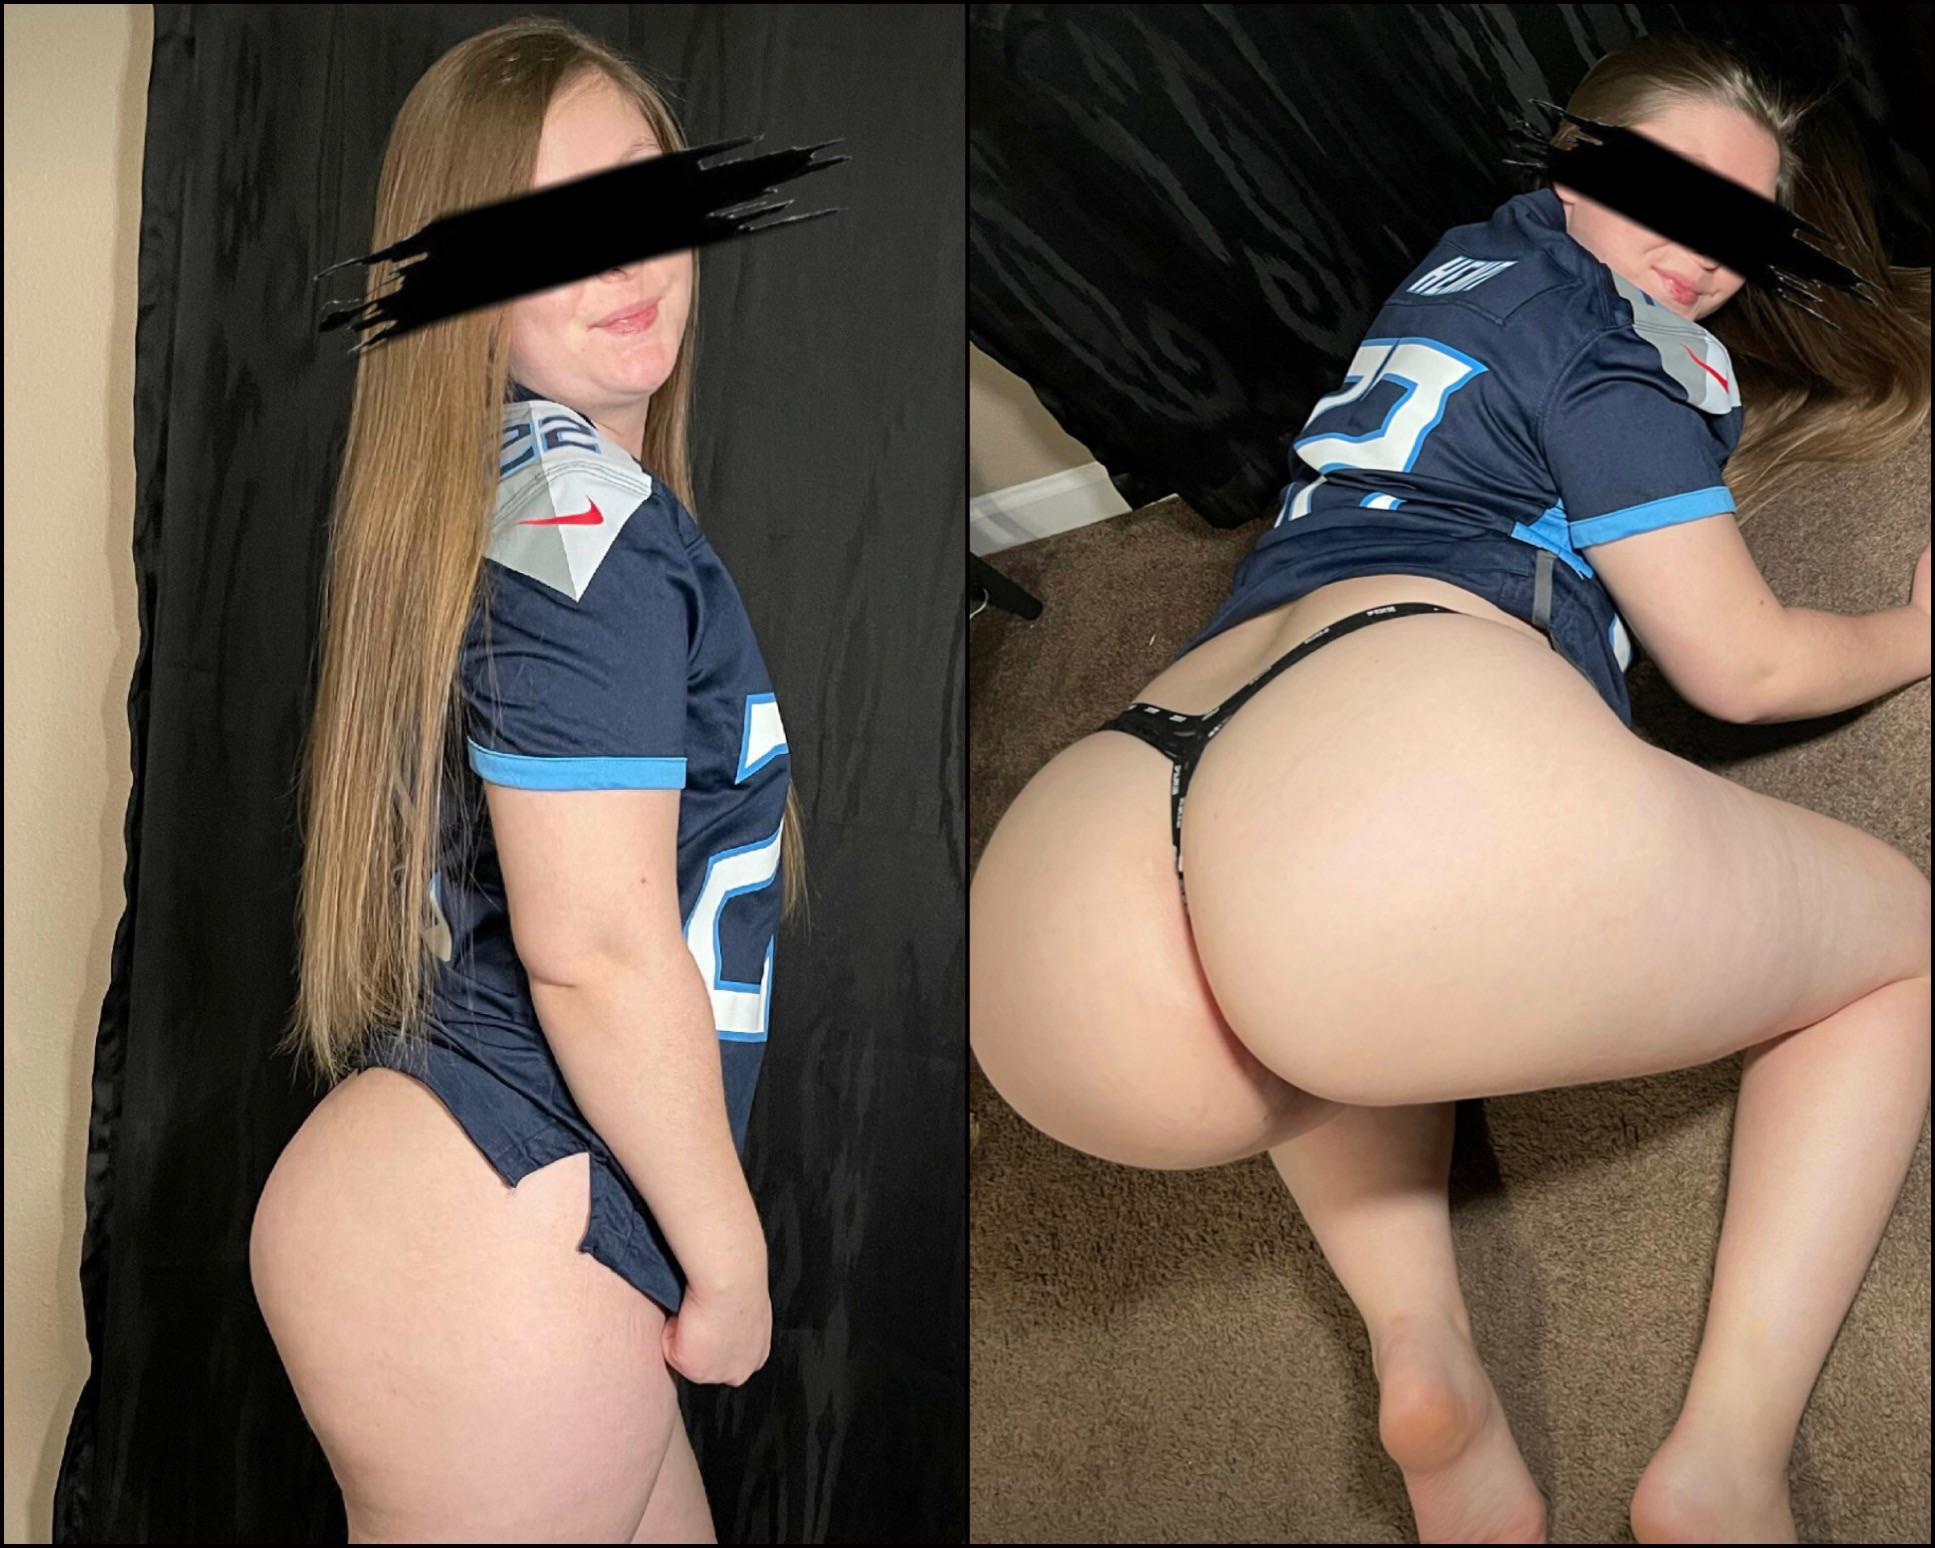 PAWG Sundays are for small football jerseys and thongs only